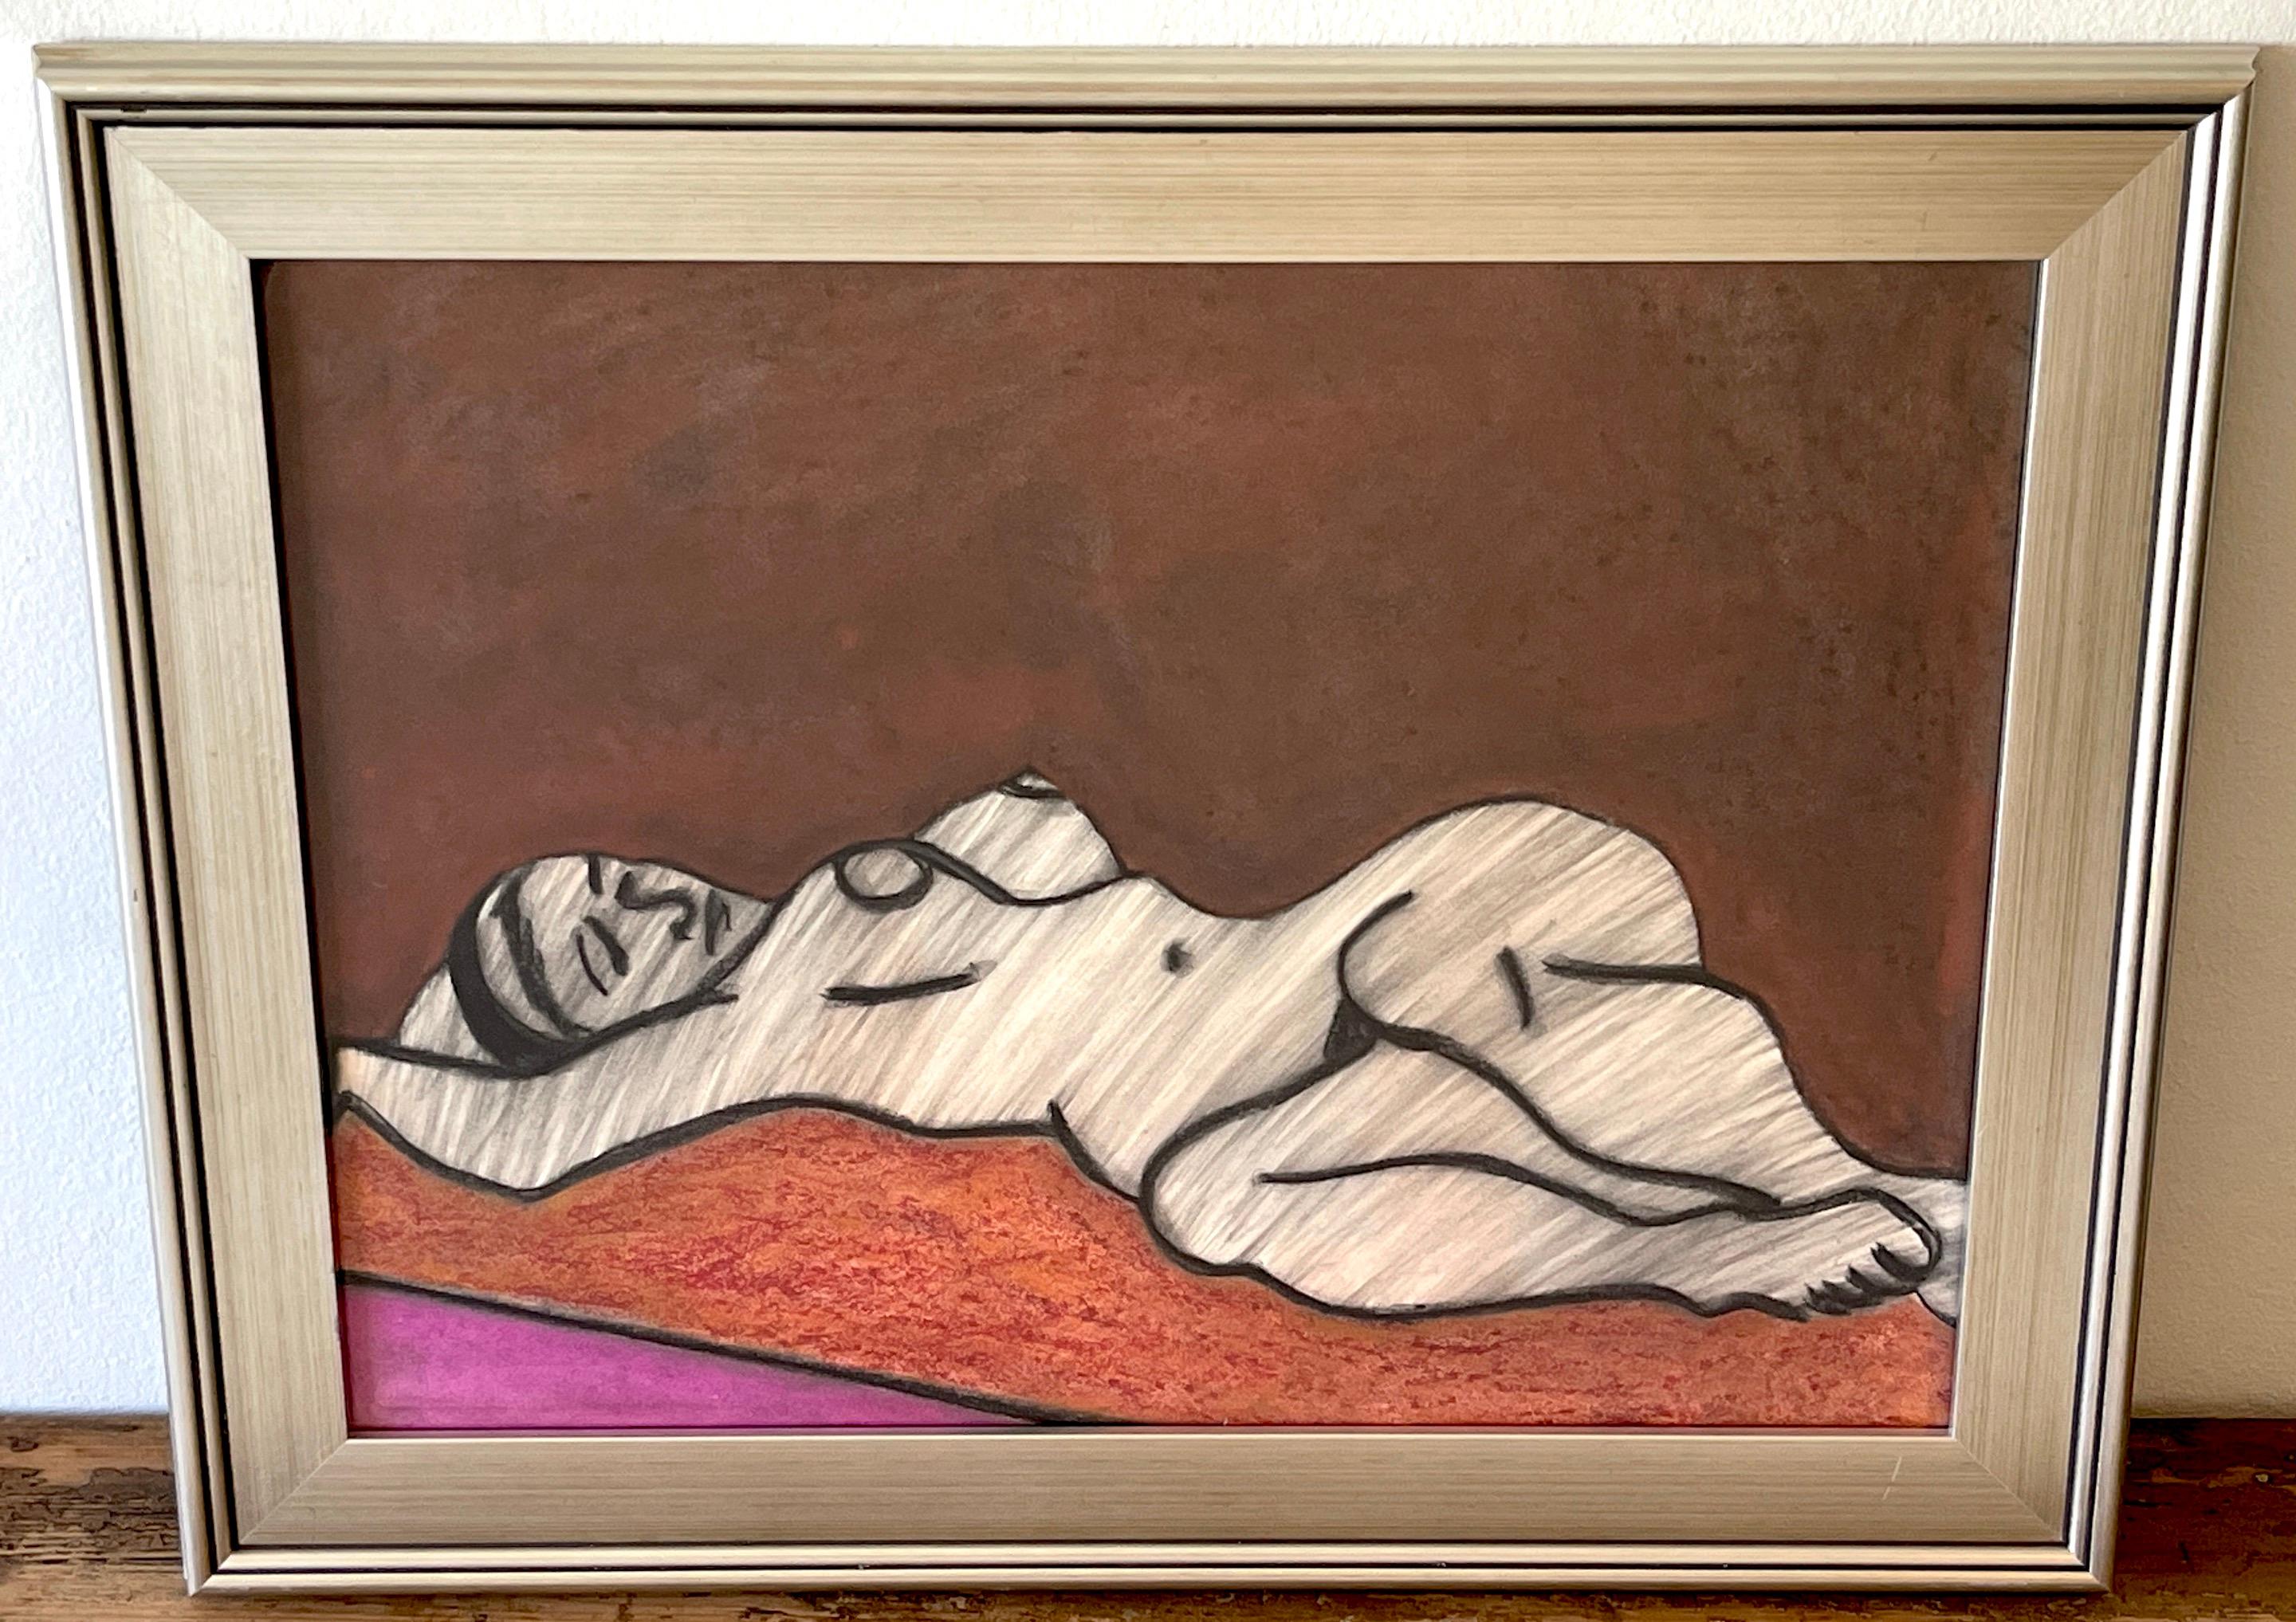 'Odalisque' Oil/Mixed Media on Paper, 1960s by Douglas D. Peden 
USA, 1933-2015, Listed Modern Painter, Mathematician & Scholar
Oil/Mixed Media on Paper 
Signed in Pencil on Back 'Douglas Peden' 
This work measures 18-Inches x 24-Inches